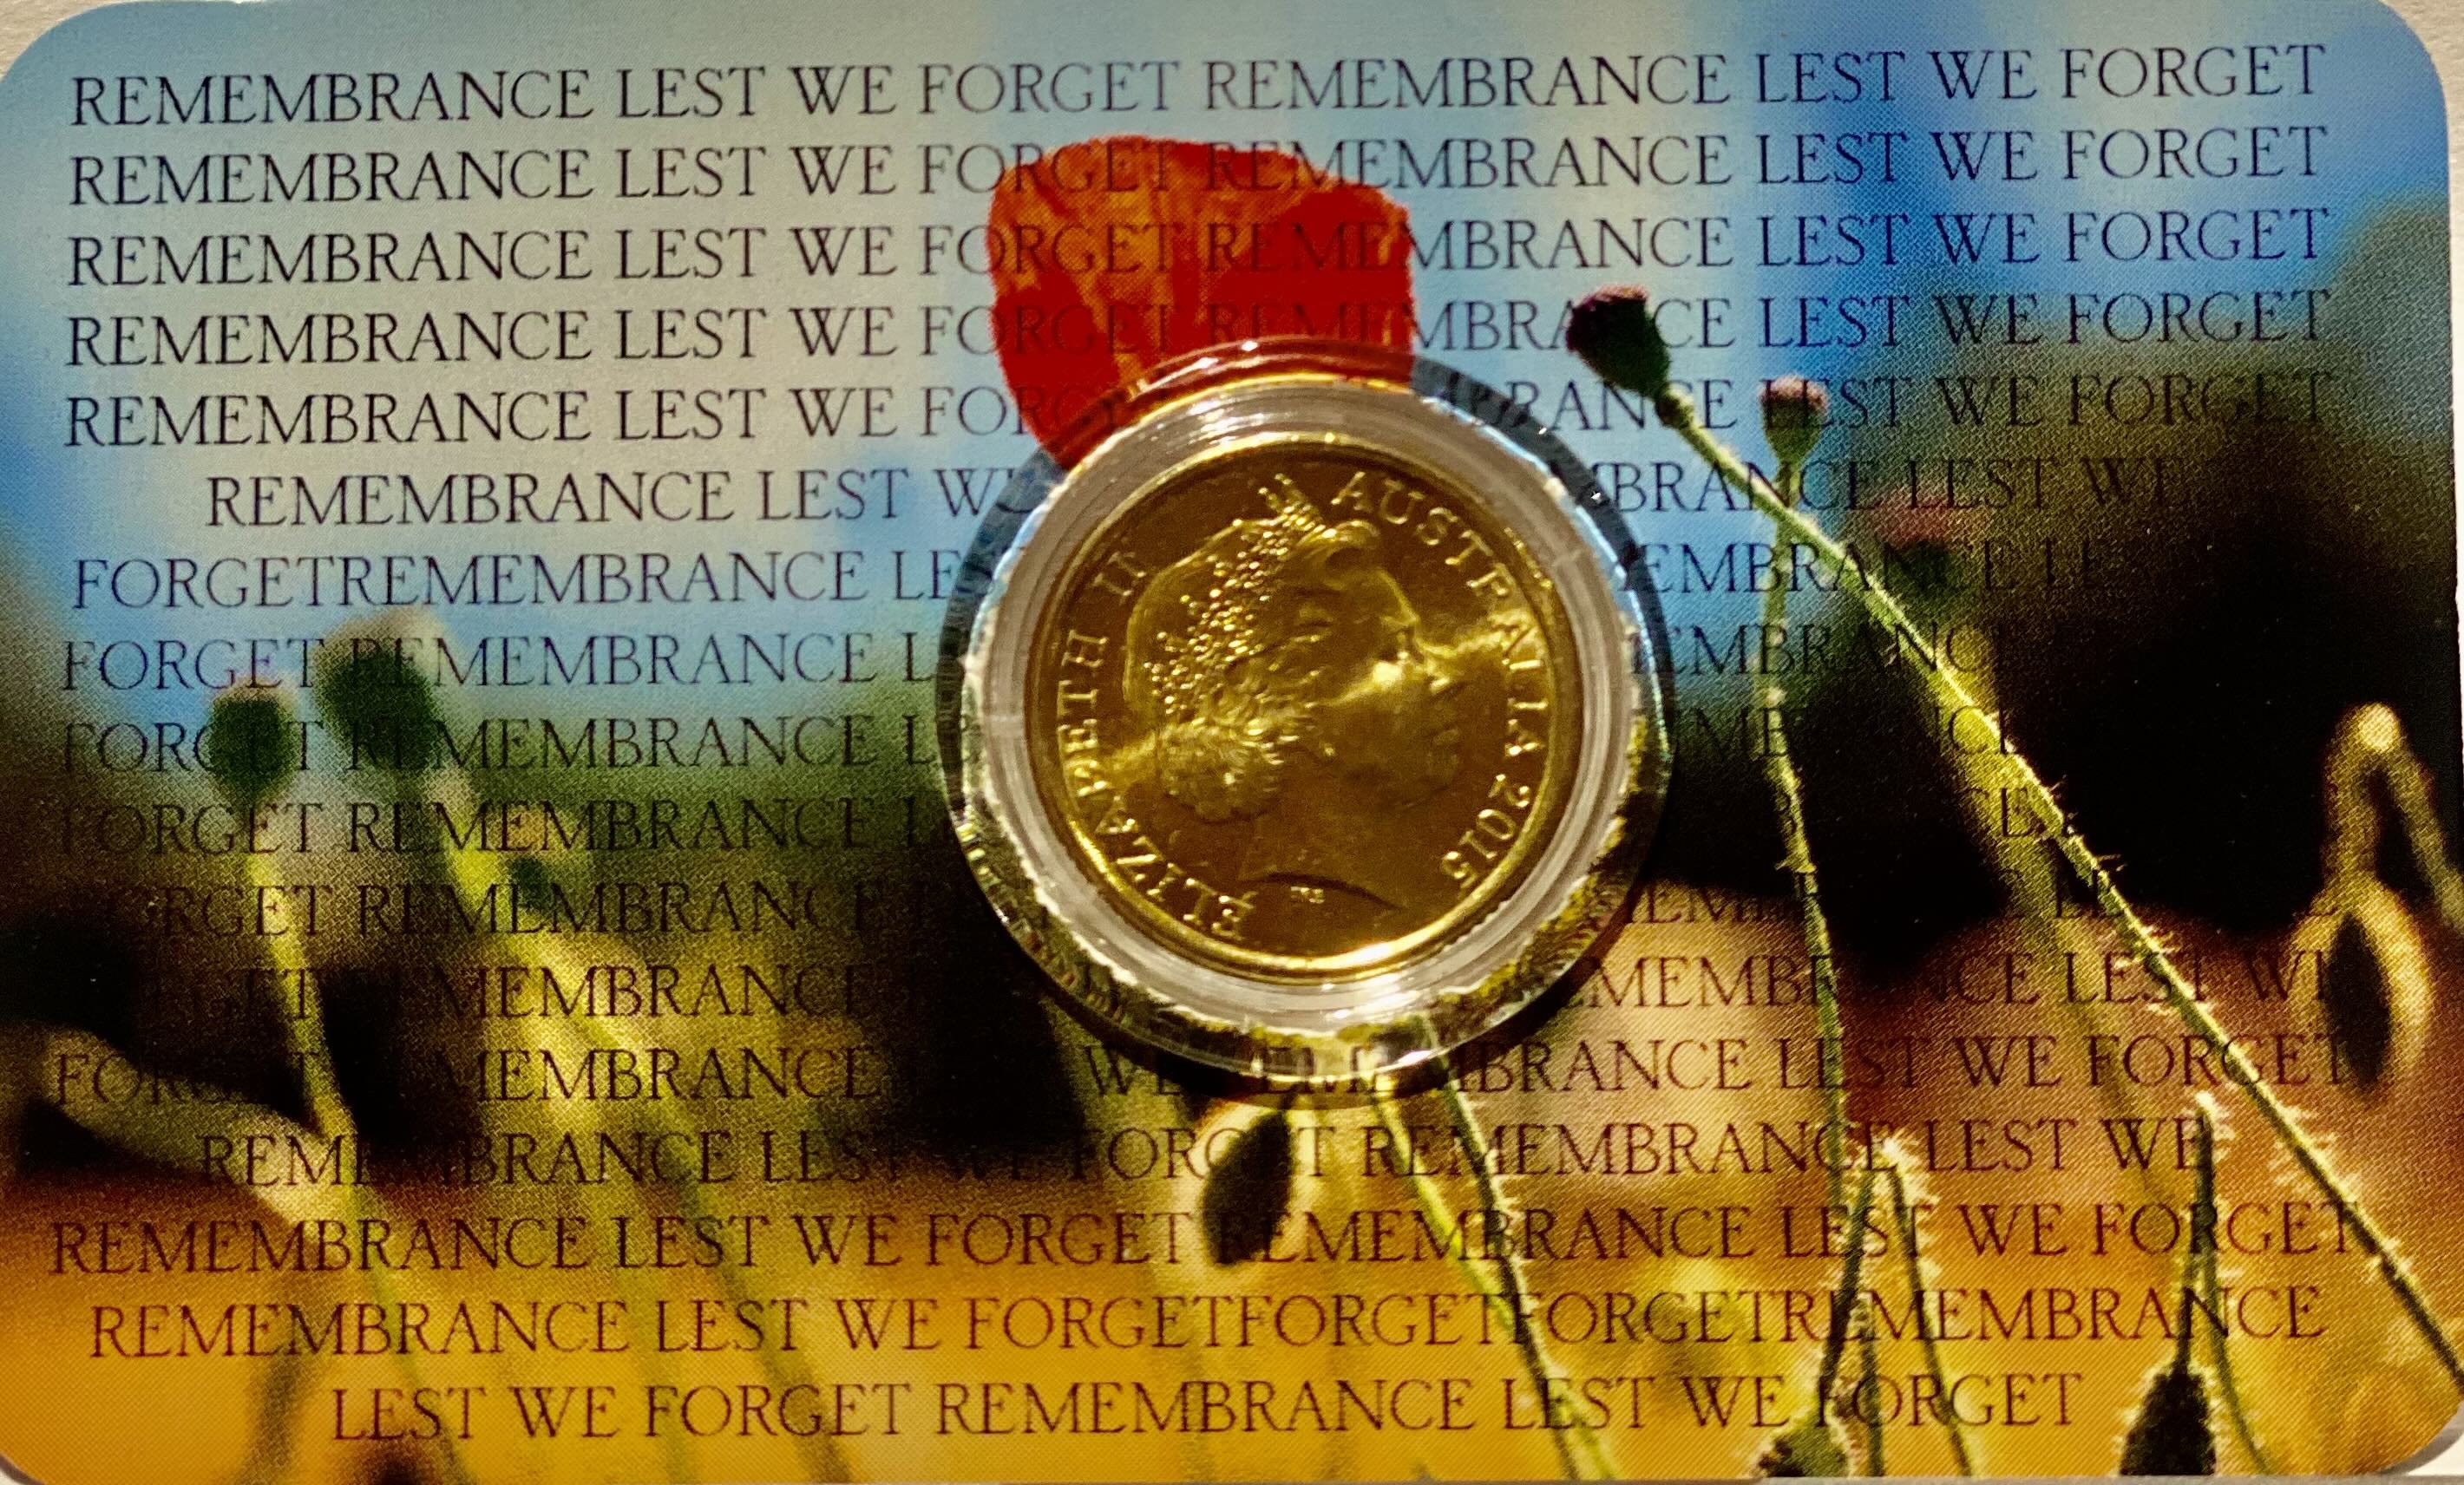 2015 Remembrance Lest We Forget $2 UNC Coin in Card